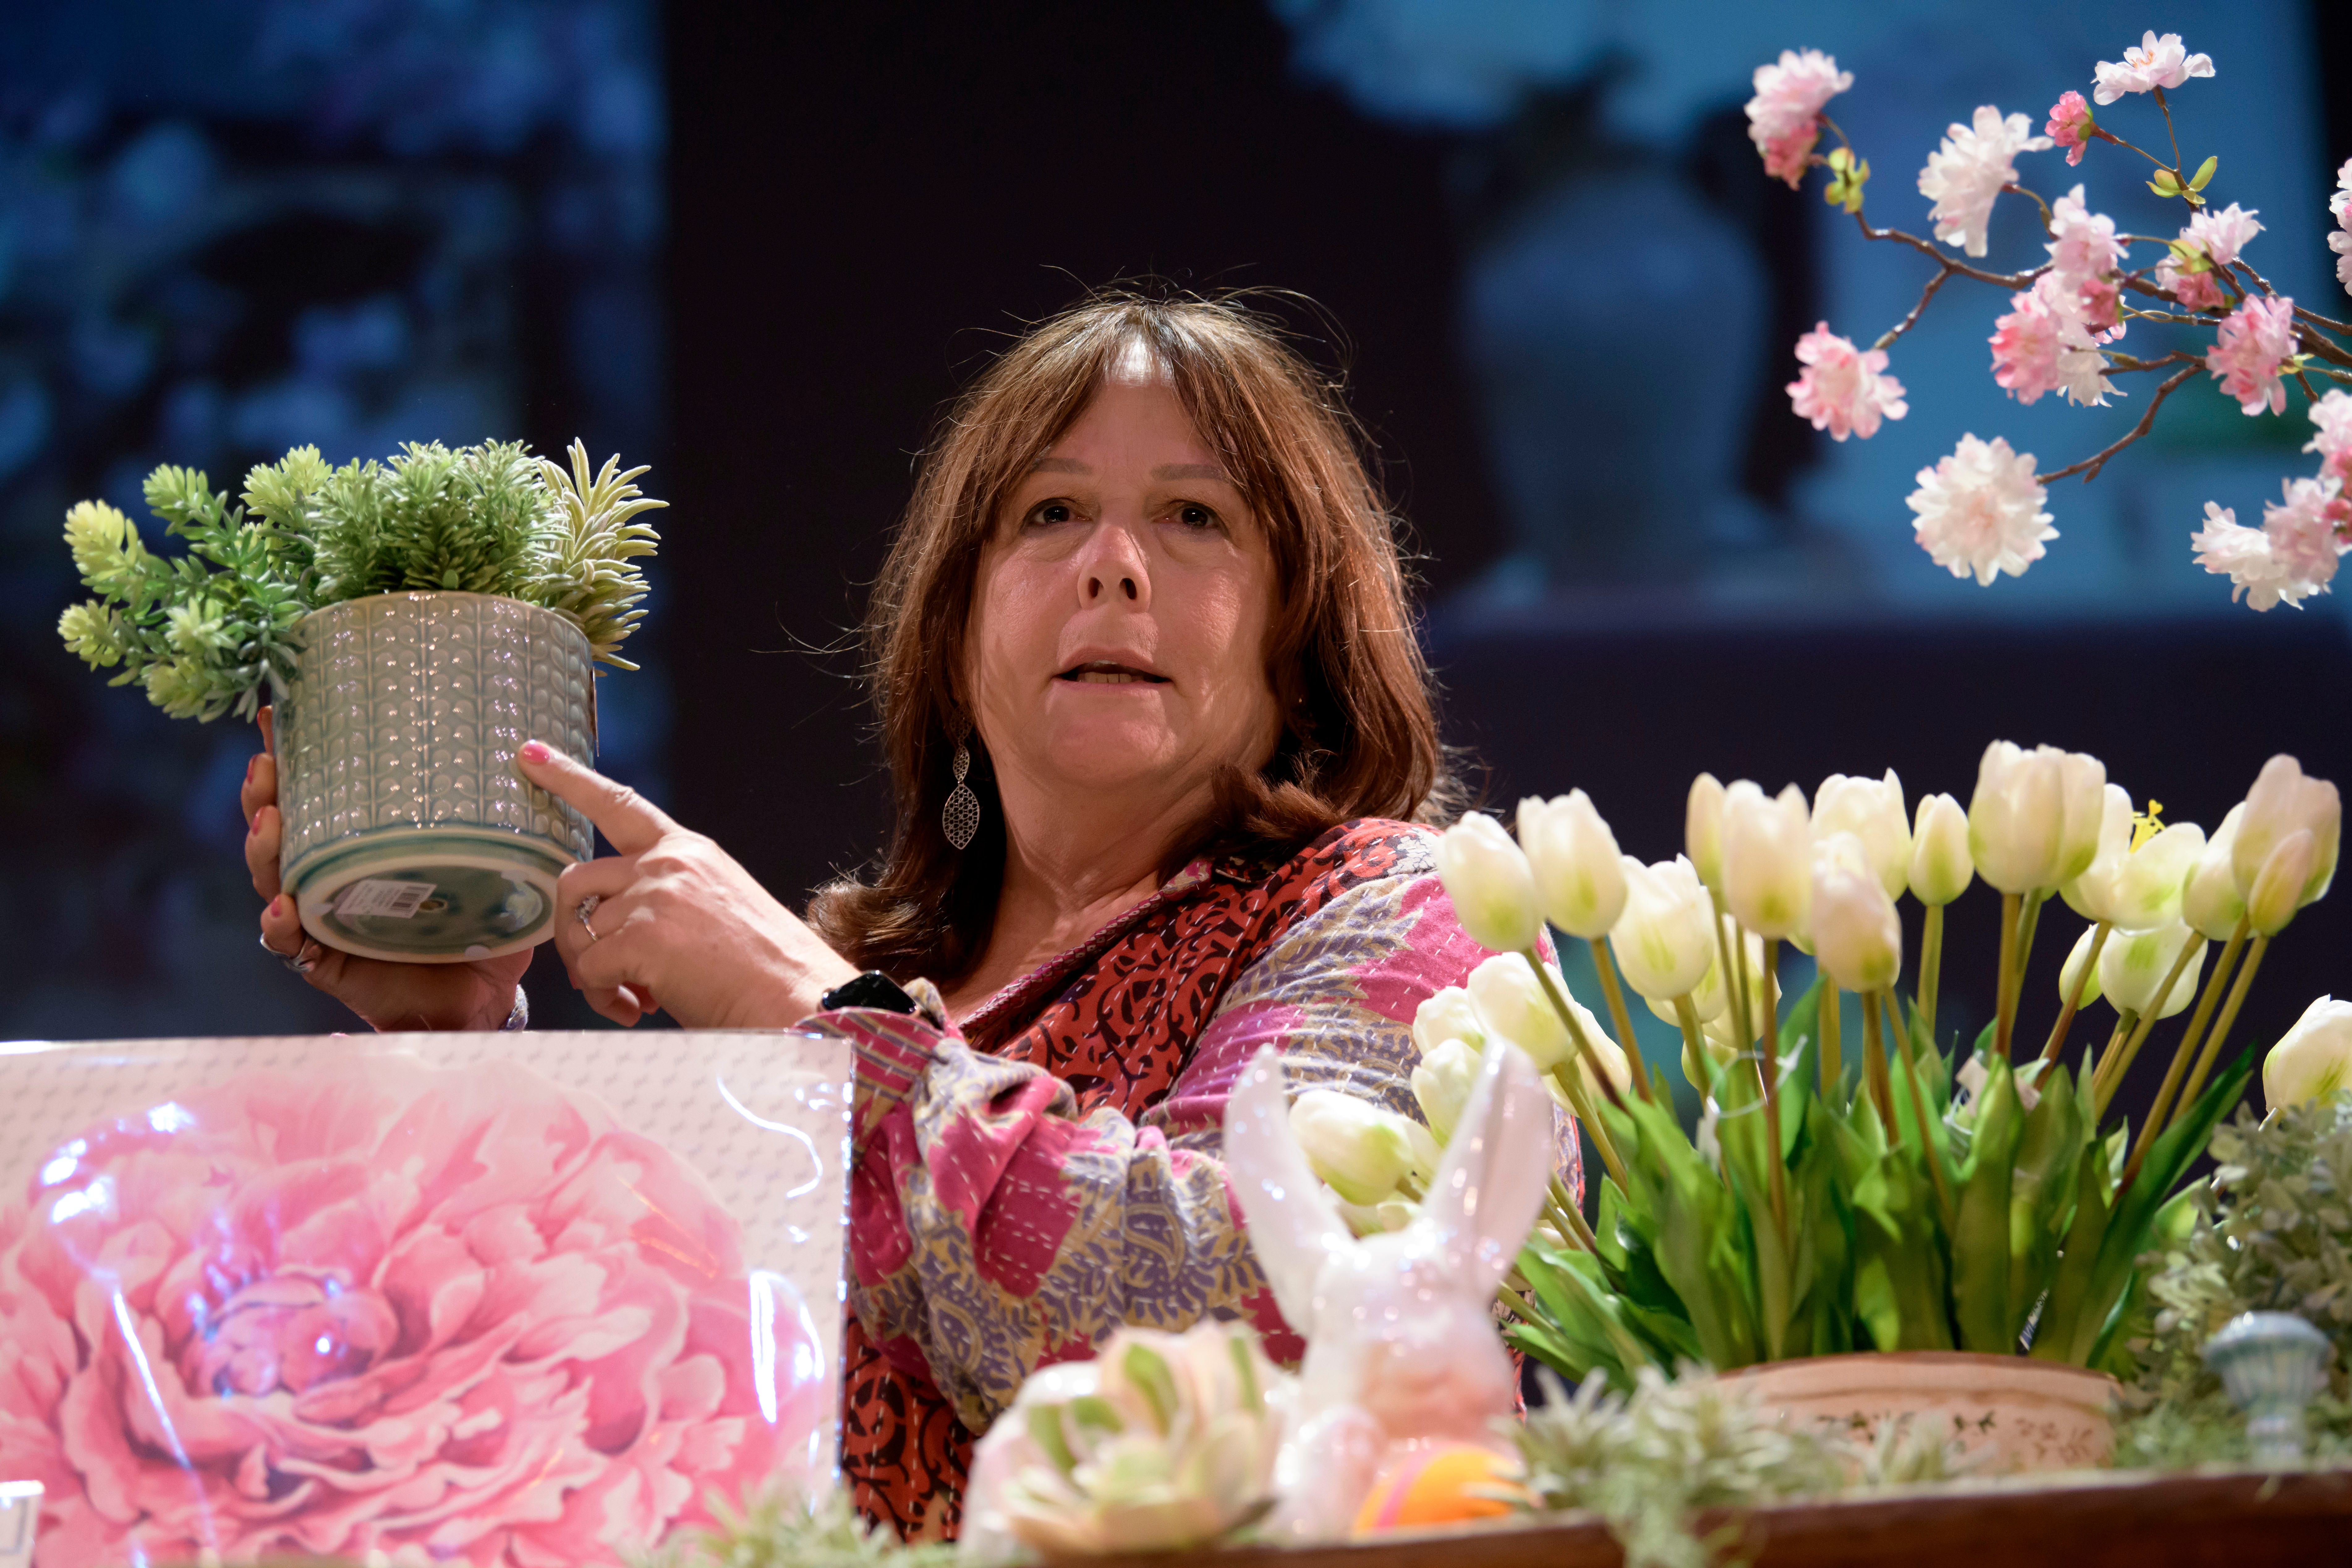 Carol Peretto, of Gardenviews at Home, discusses options for a spring collection of flowers and home design ideas during the event series Dish and Design, at the Berman Center for Performing Arts, in West Bloomfield, March 20, 2024.